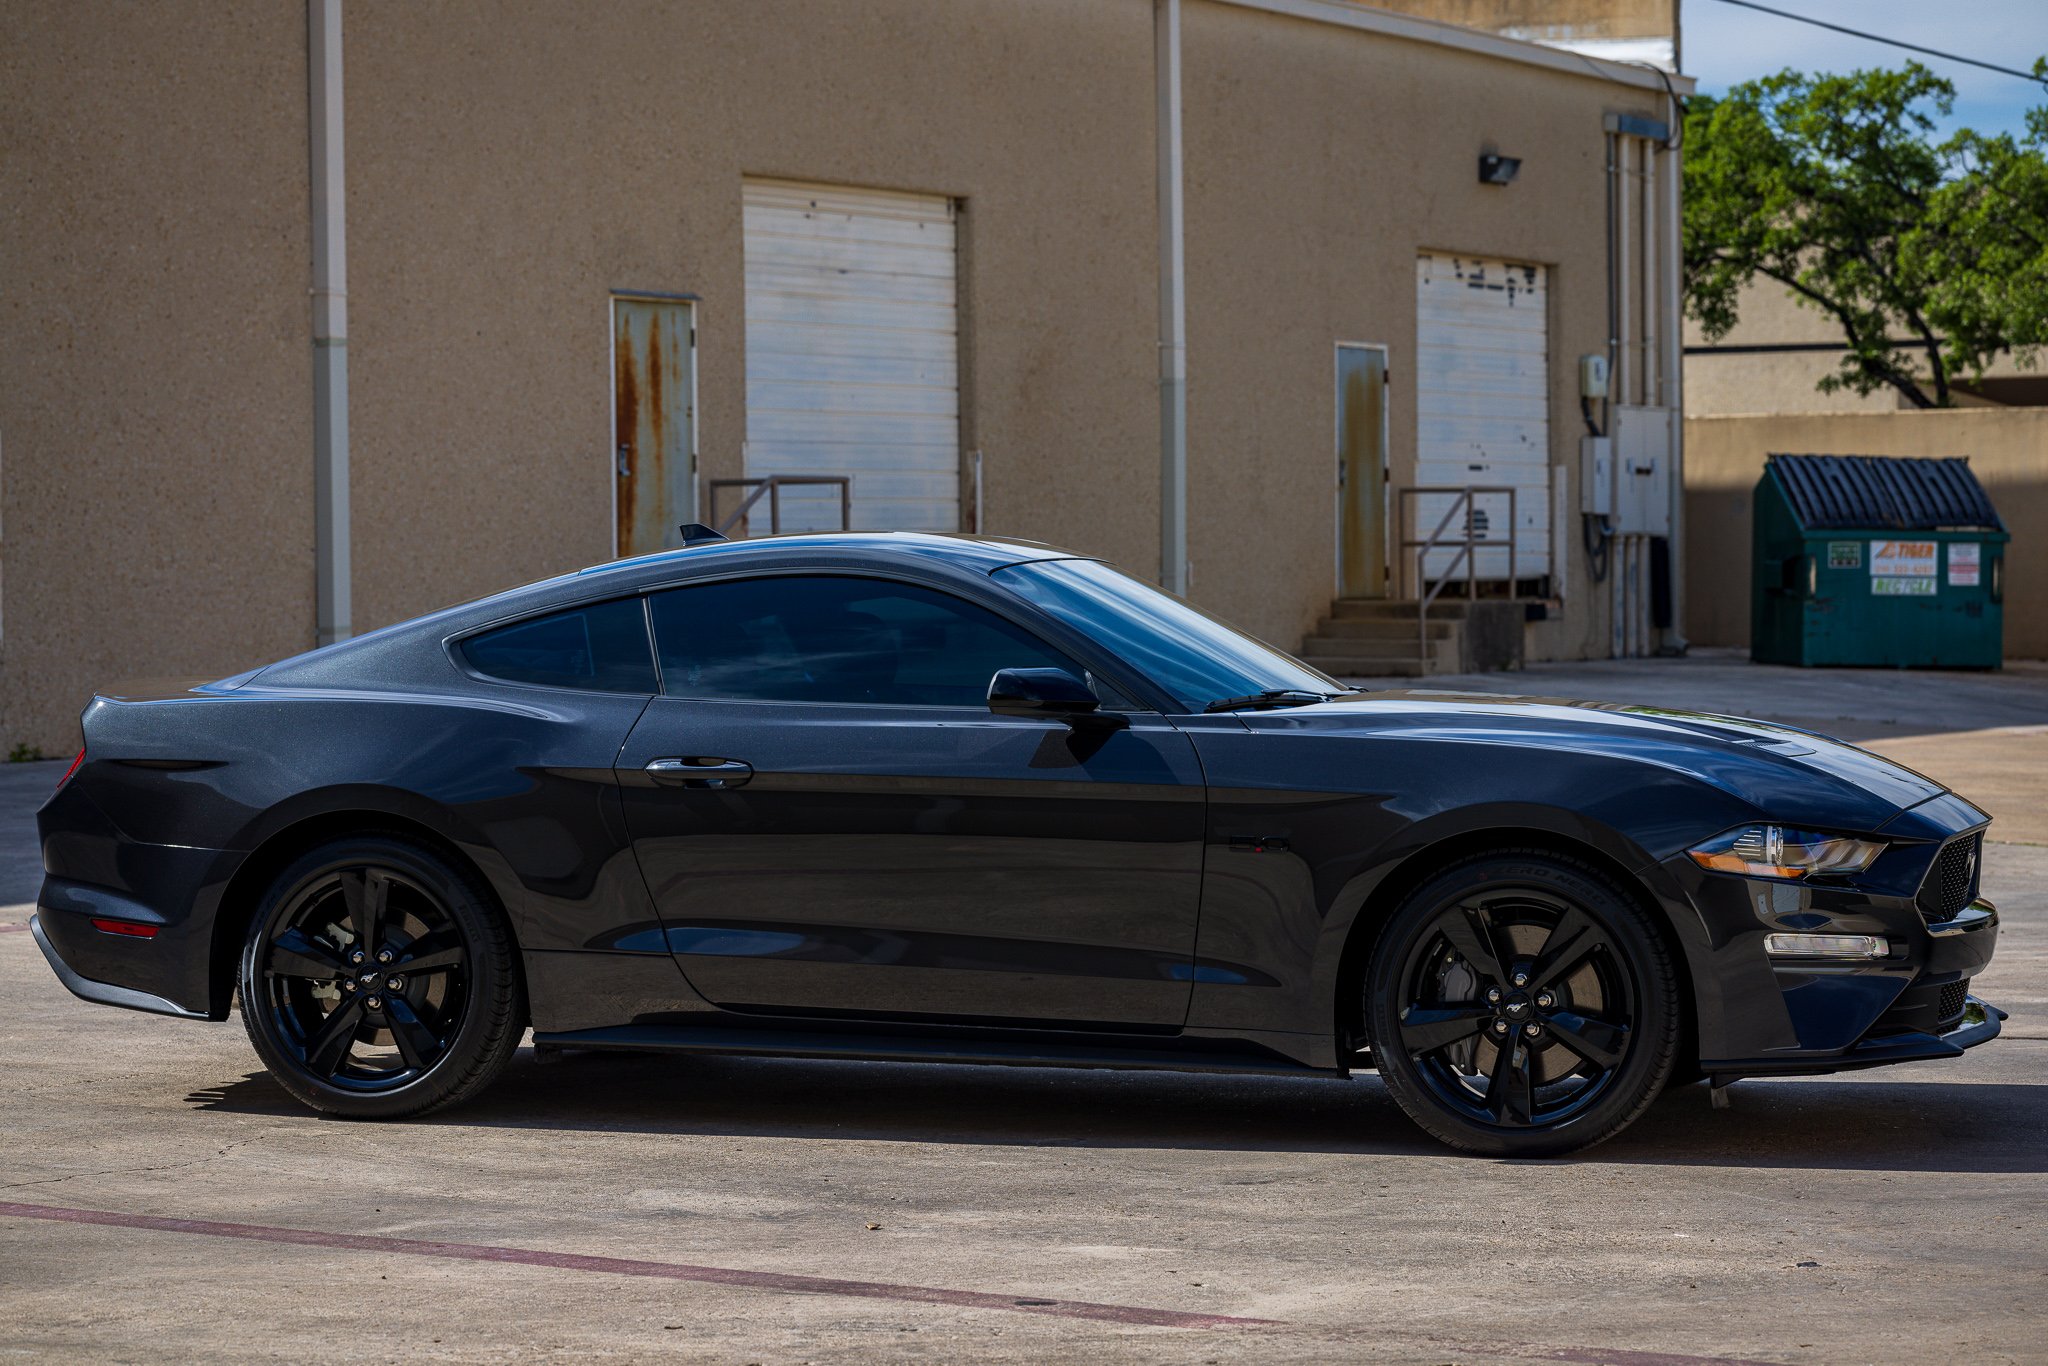 Ford Mustang Paint Protection Film - Is 8 Mil or 10 Mil Best? _ Automotive Paint Protection Film in San Antonio, Texas - 4